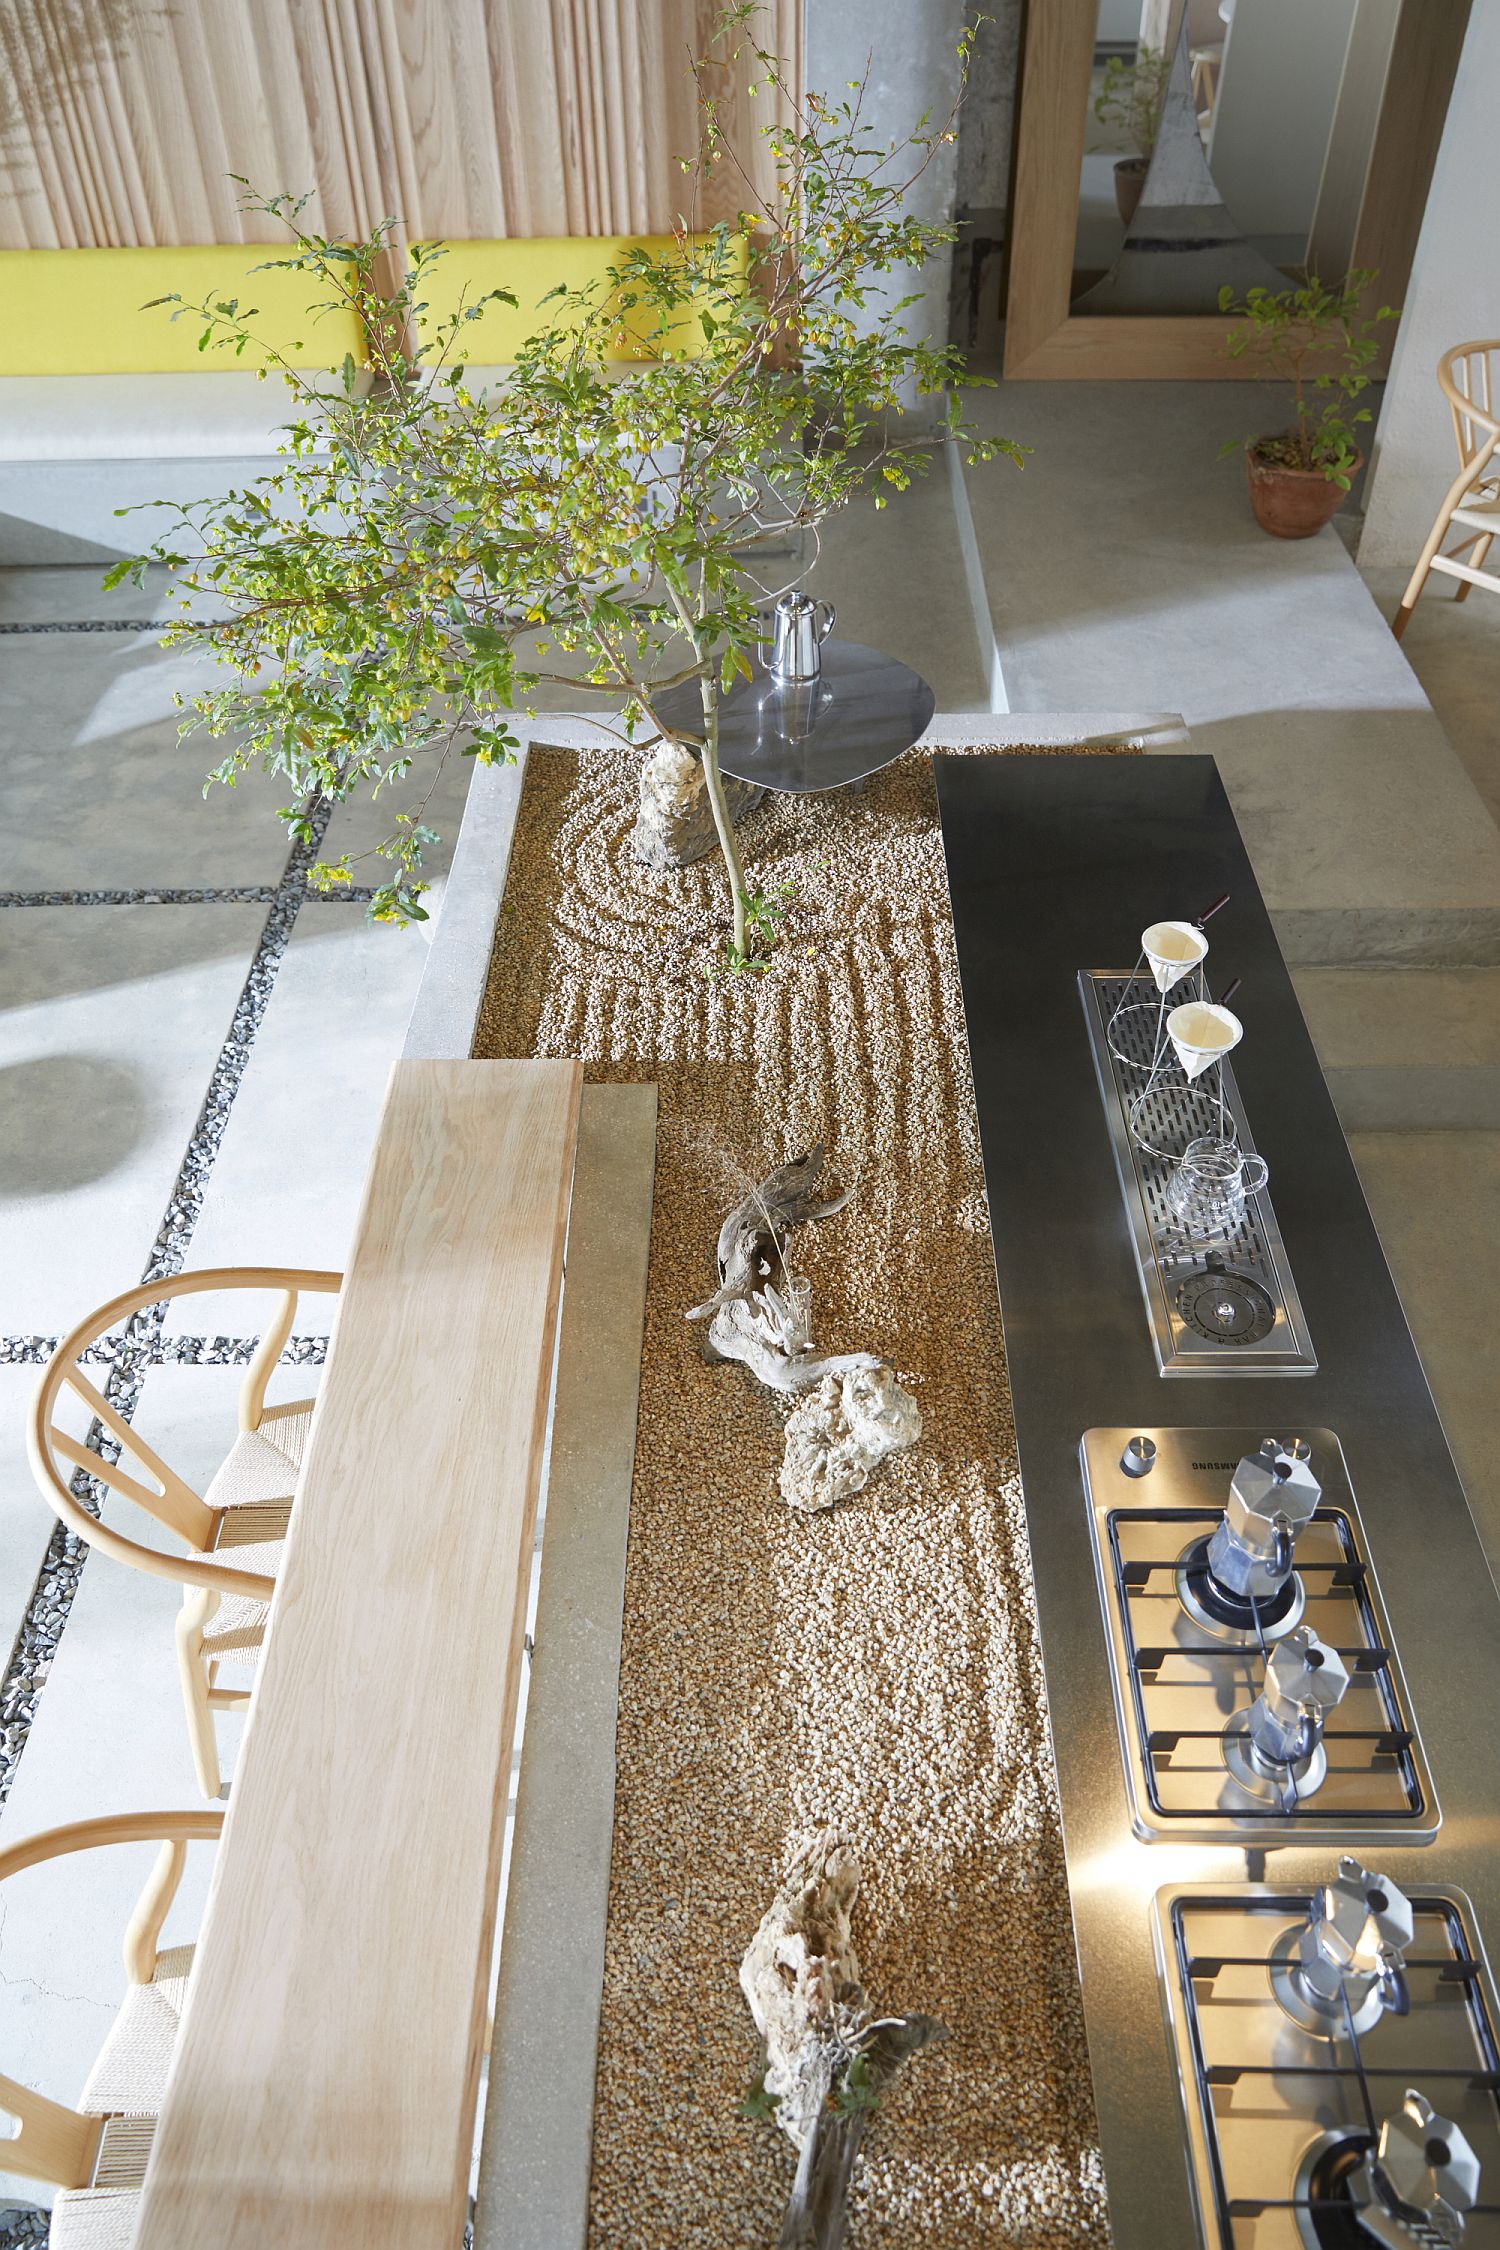 Gravel-filled central area along with greenery inside the house